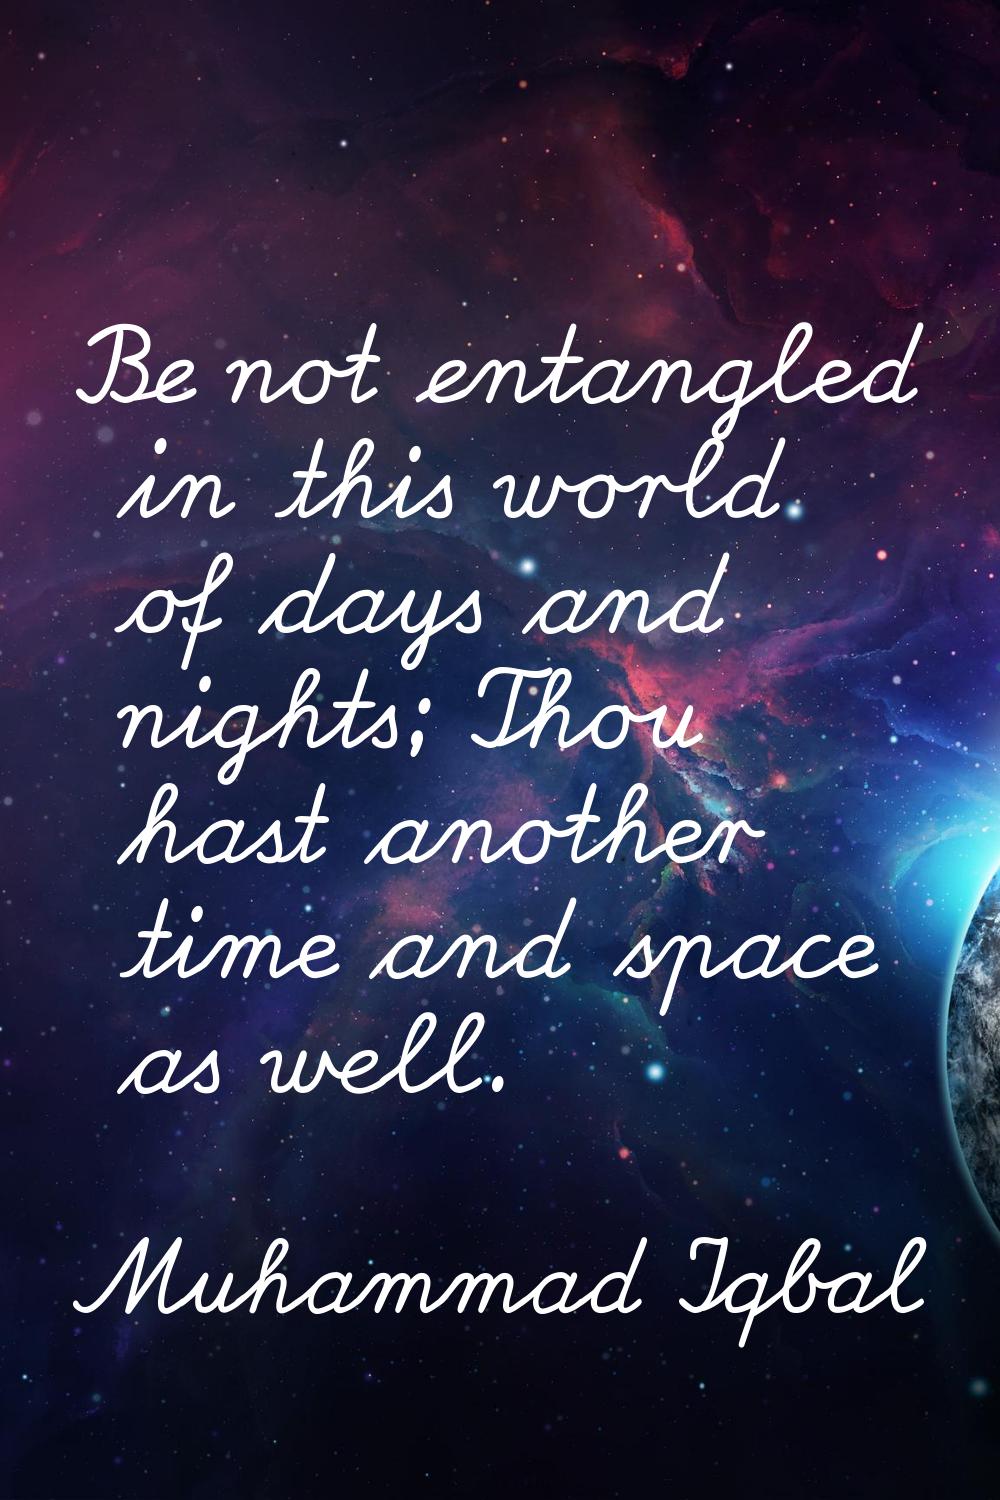 Be not entangled in this world of days and nights; Thou hast another time and space as well.